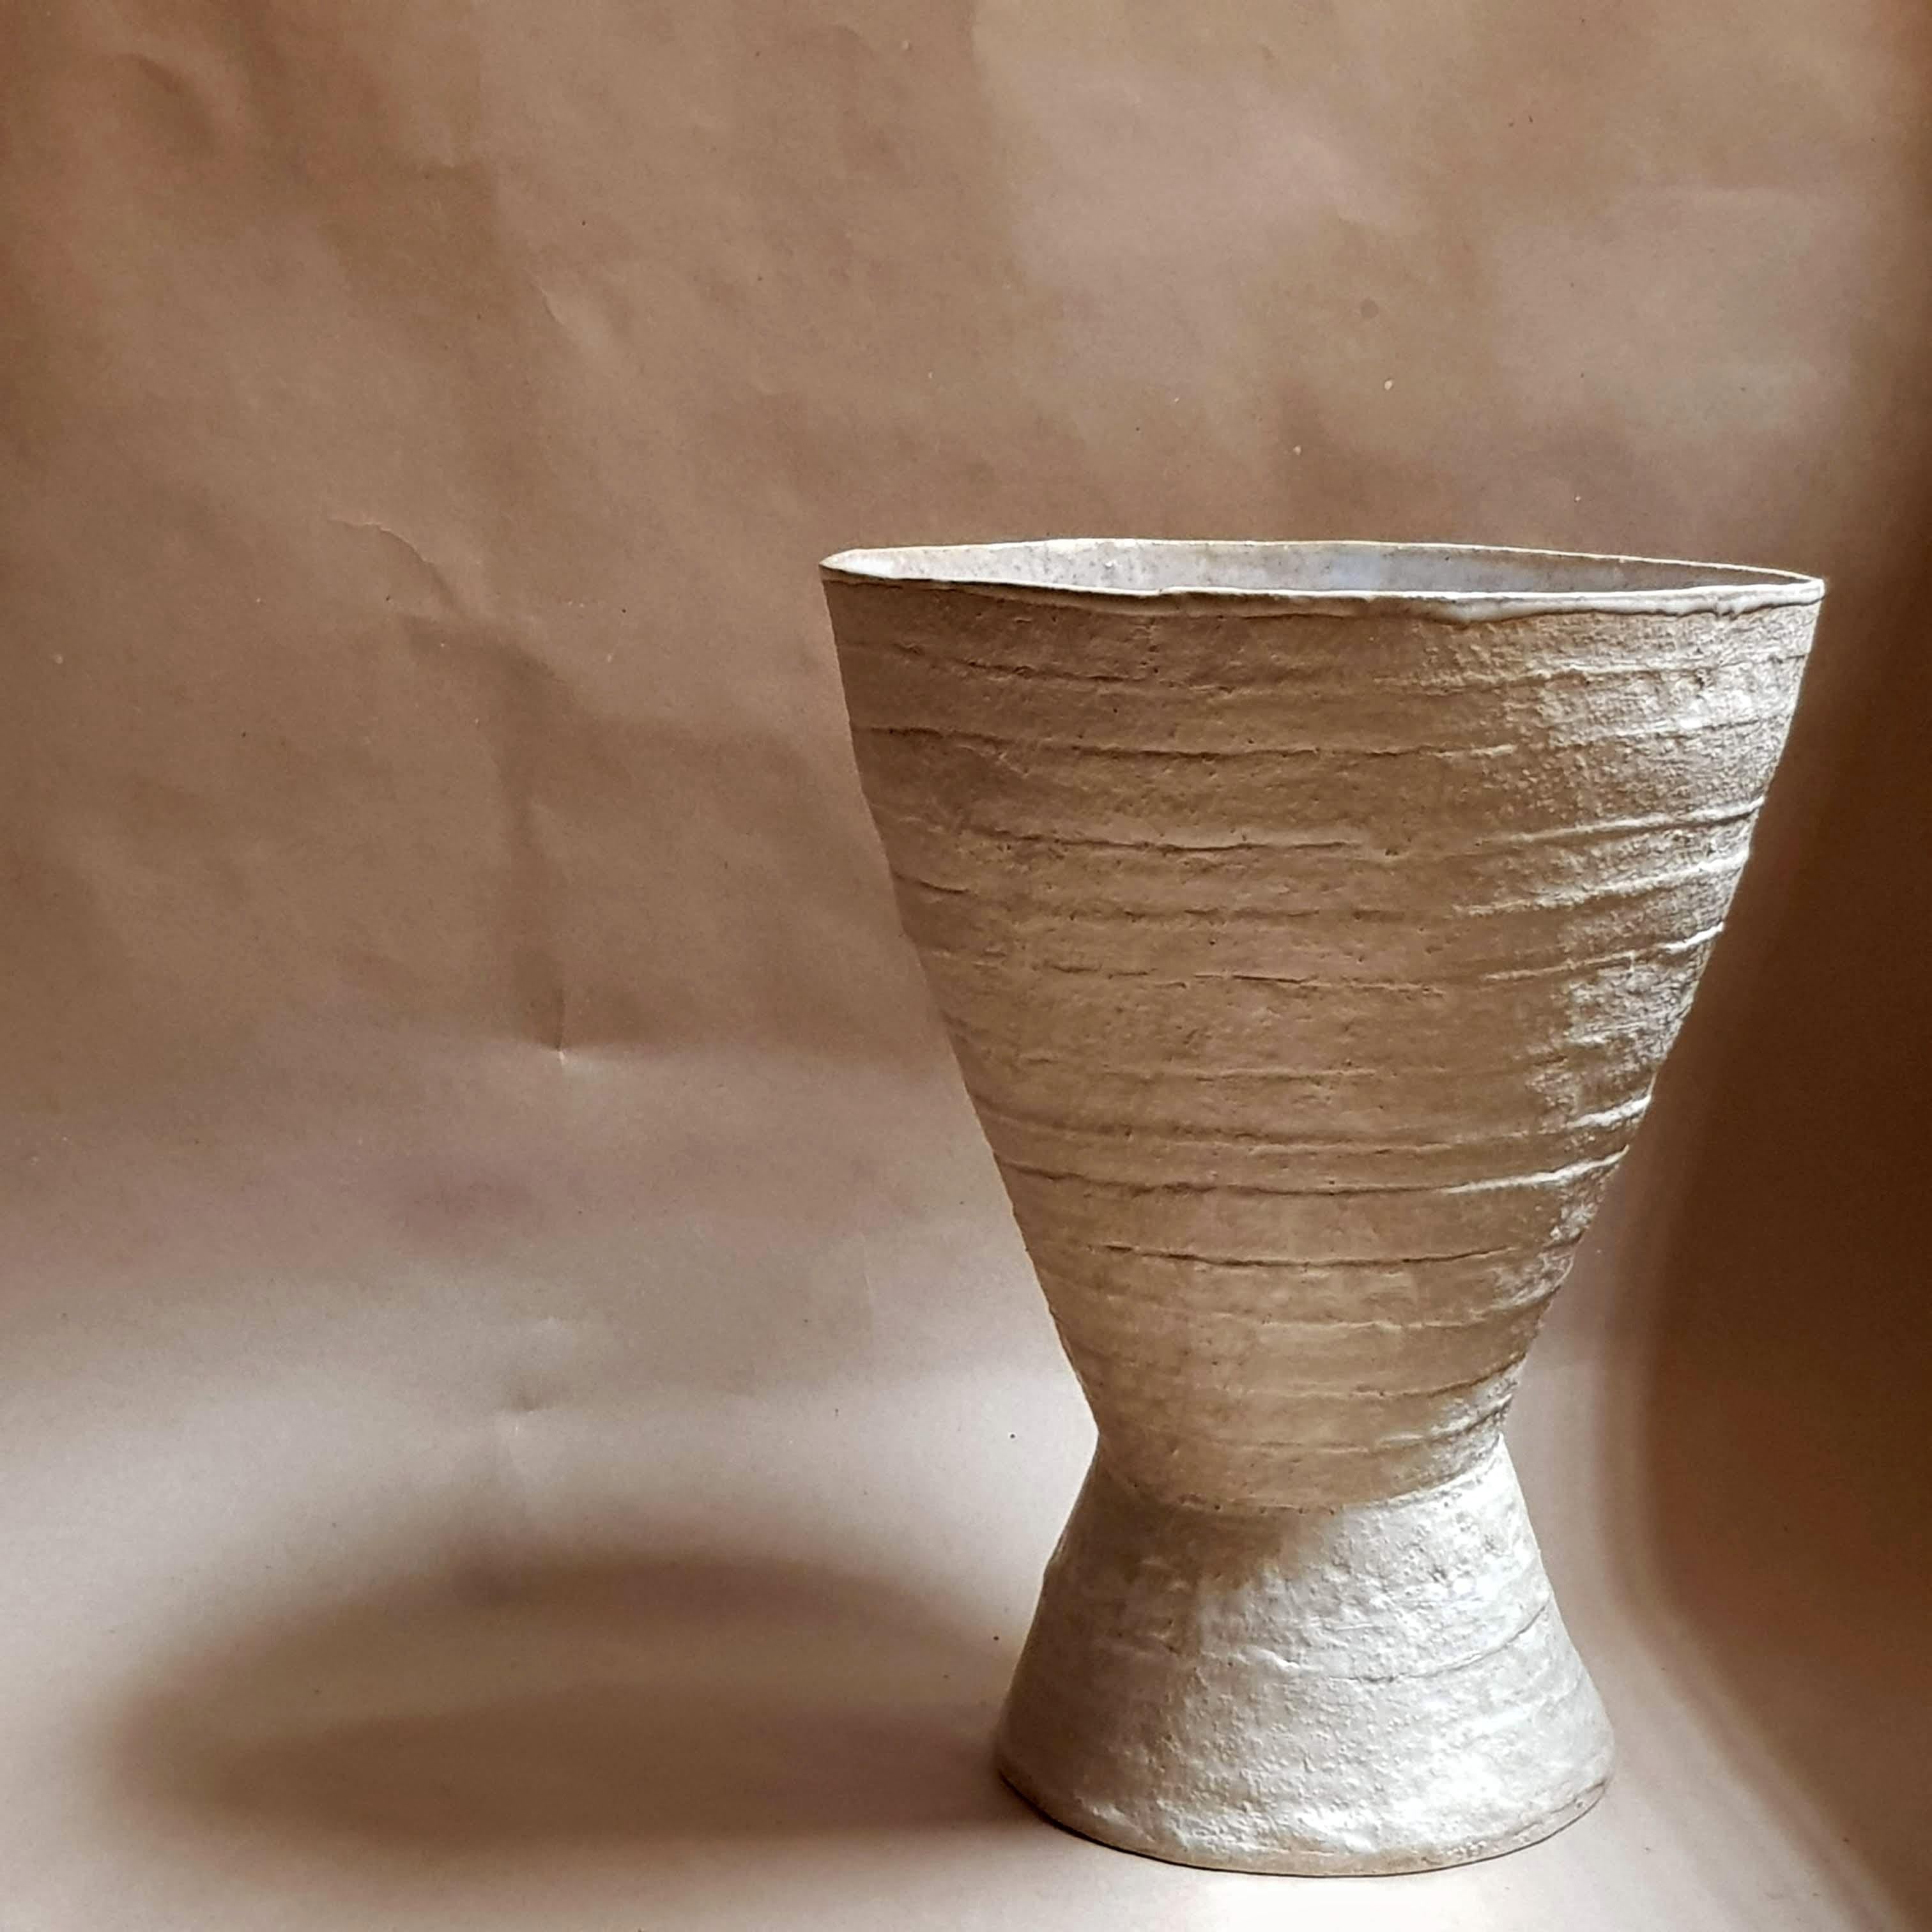 Beige Stoneware Krater Vase by Elena Vasilantonaki
Unique
Dimensions: ⌀ 25 x H 30 cm (Dimensions may vary)
Materials: Stoneware
Available finishes: Black, Beige, Brown, Red, White Patina. Interior glazed with Ash Glaze

Growing up in Greece I was